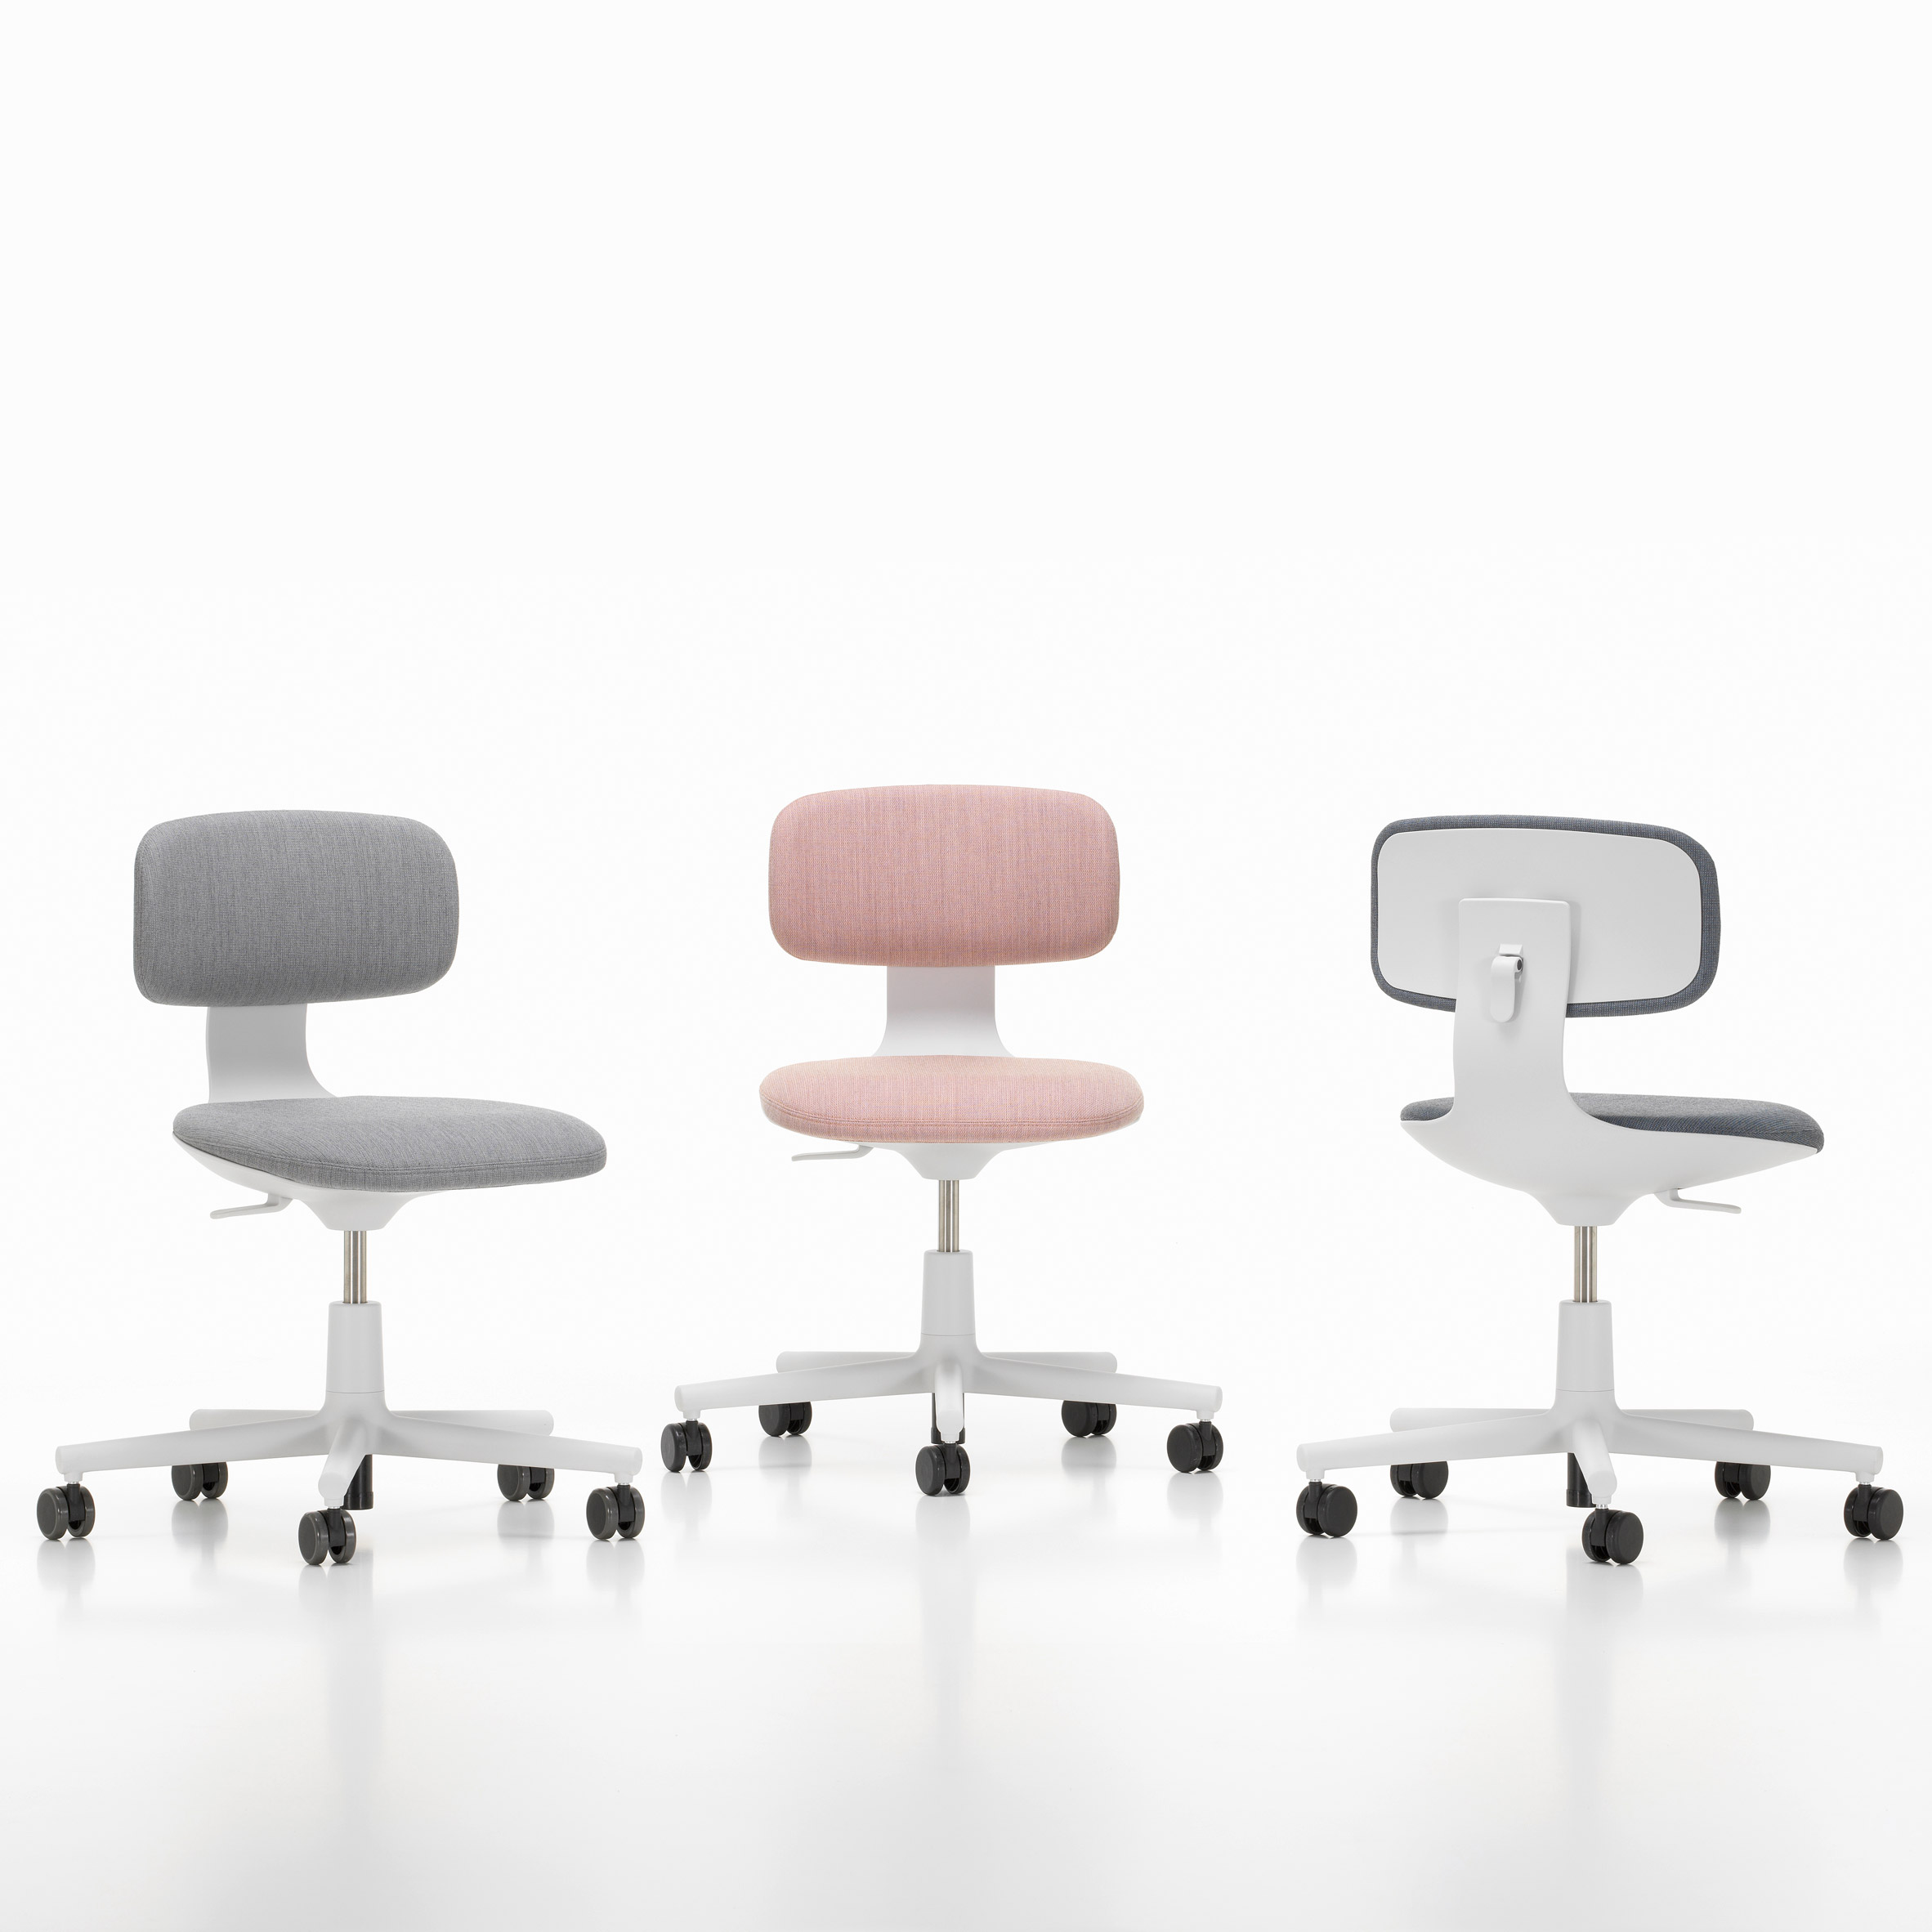 Rookie by Konstantin Grcic for Vitra